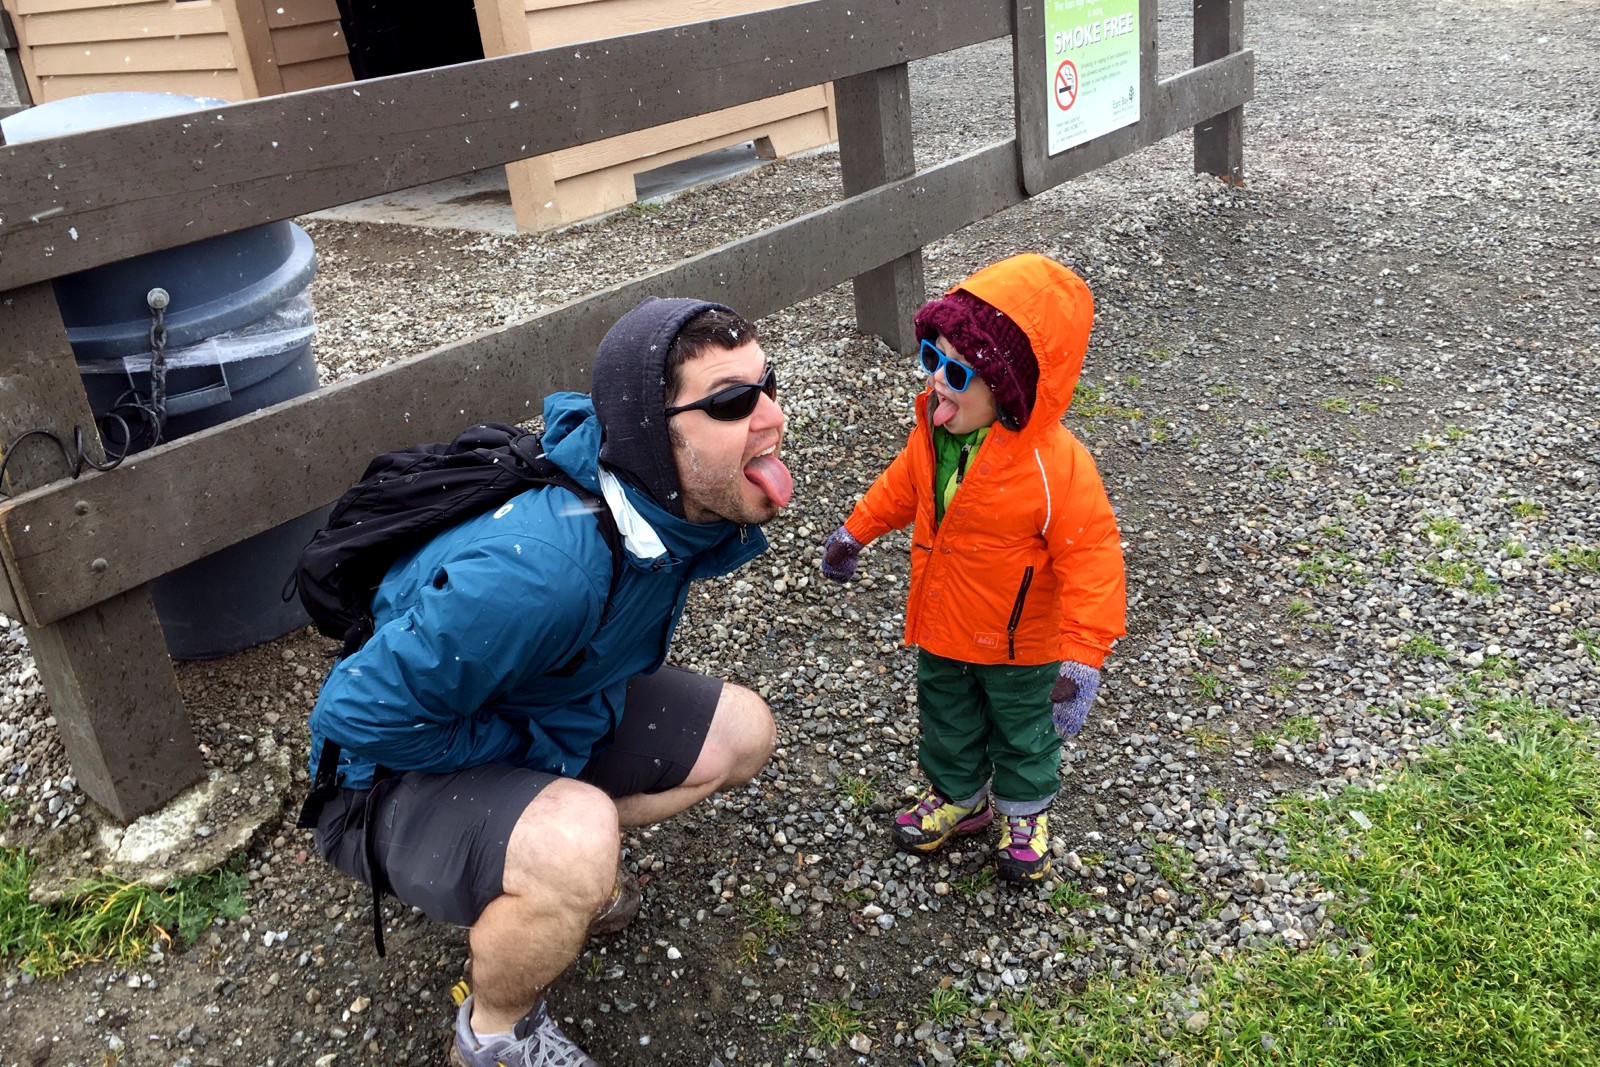 Catching snowflakes on our our tongues with Thero